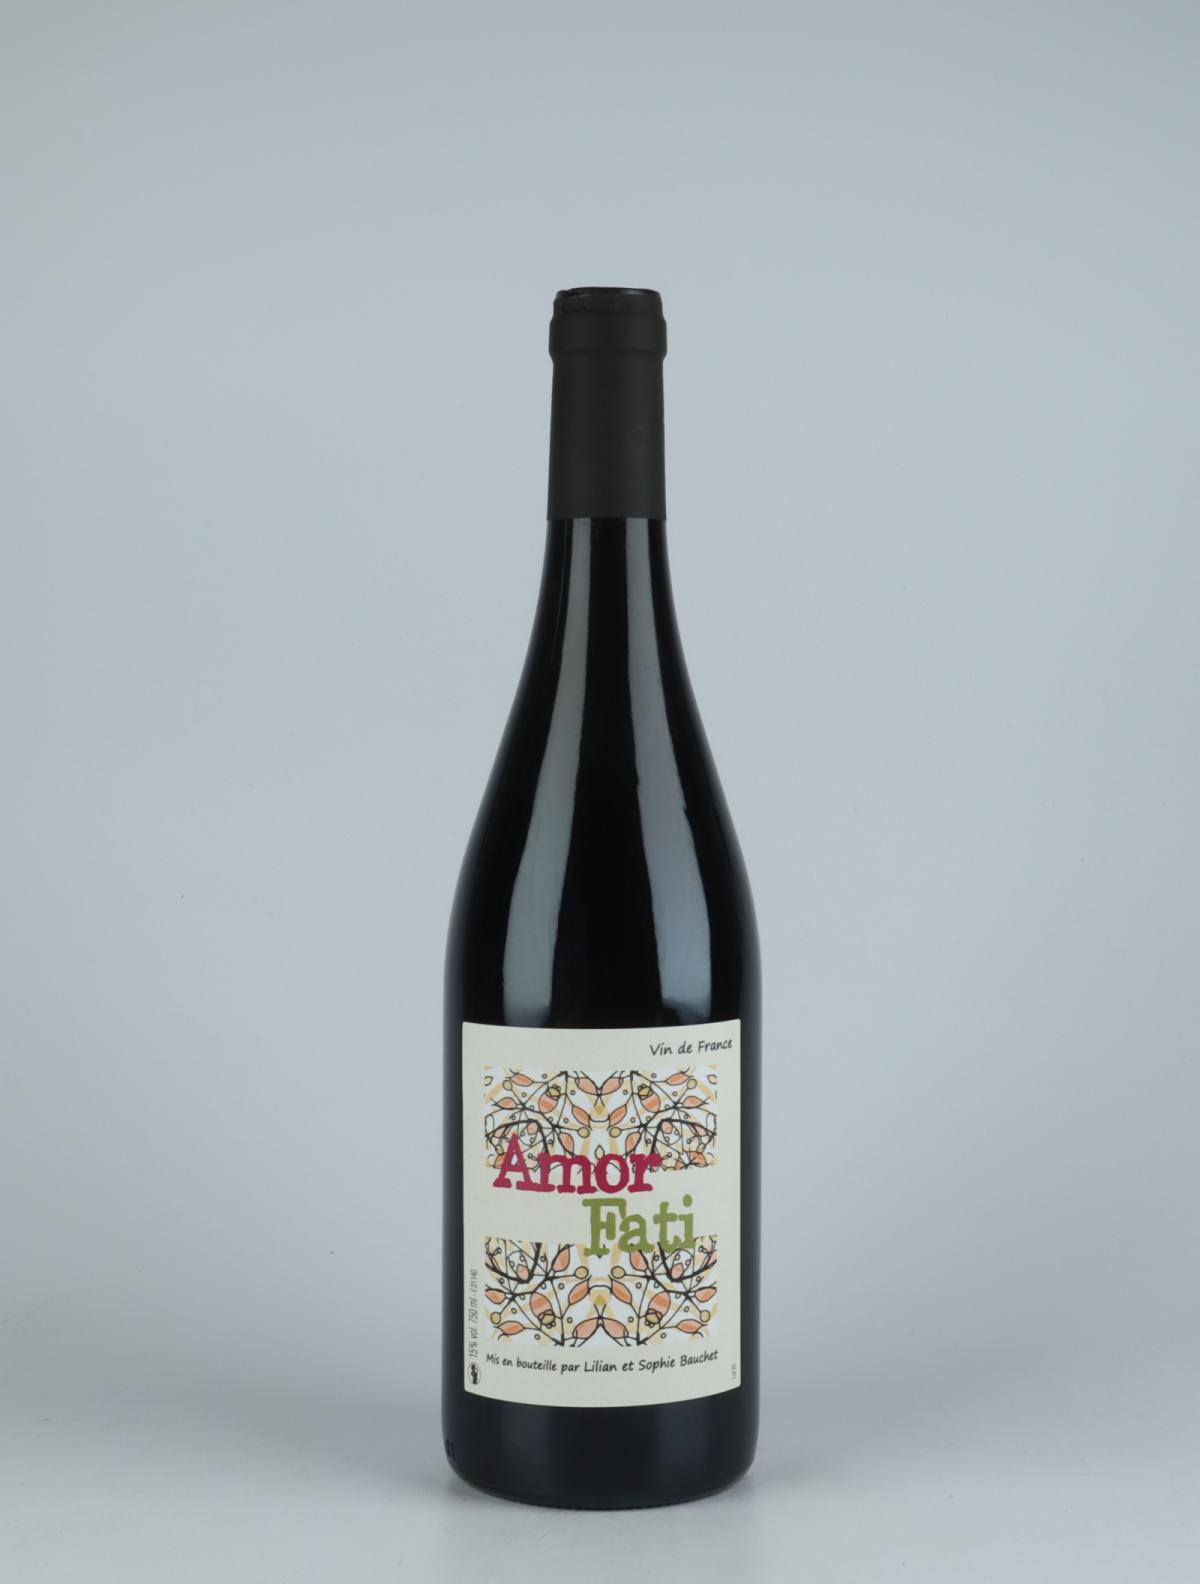 A bottle 2020 Amor Fati Red wine from Lilian et Sophie Bauchet, Beaujolais in France